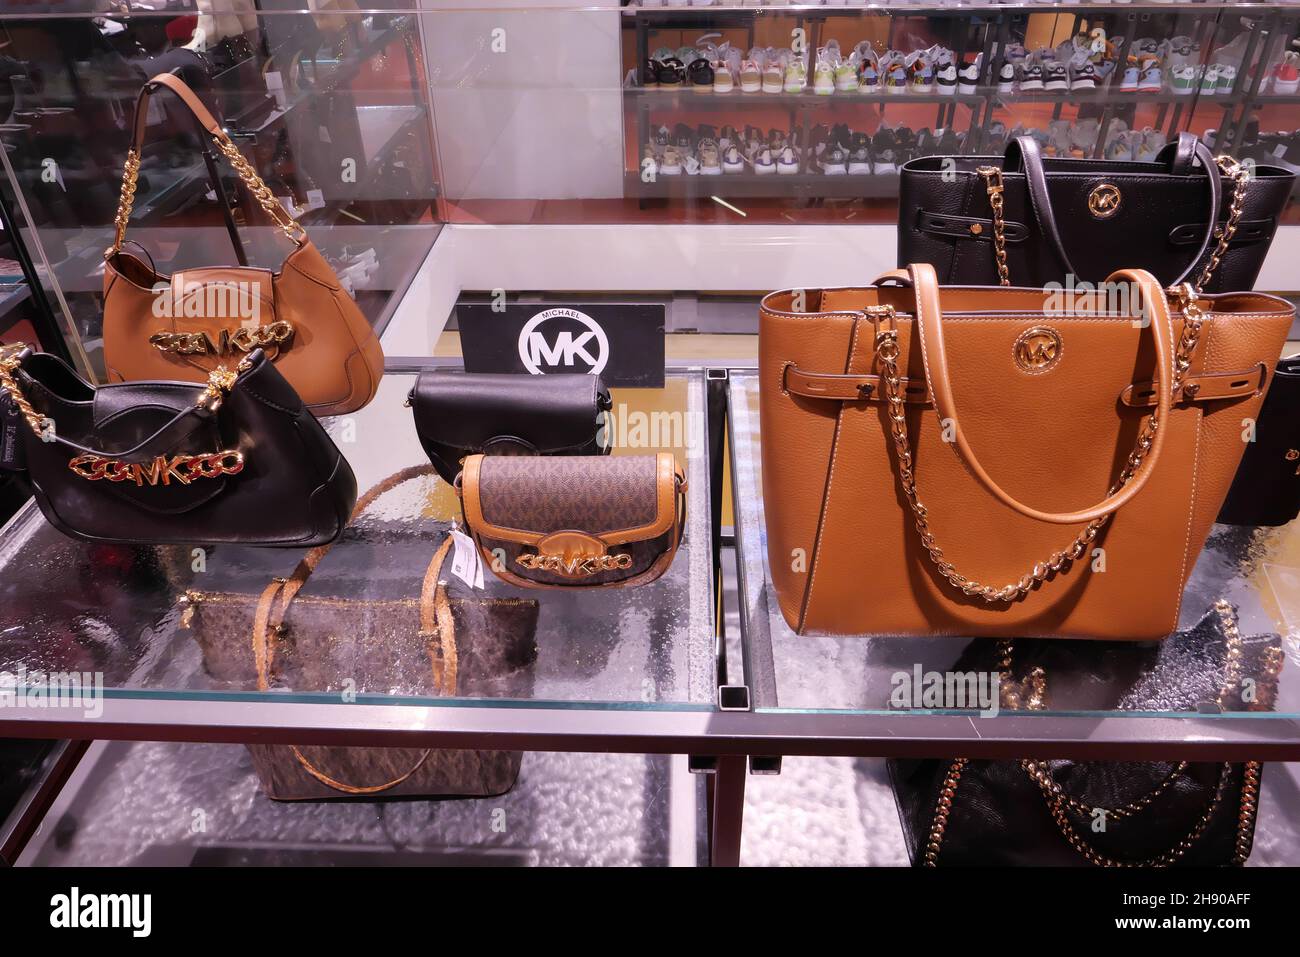 MICHAEL KORS BAGS ON DISPLAY INSIDE THE FASHION STORE Stock Photo